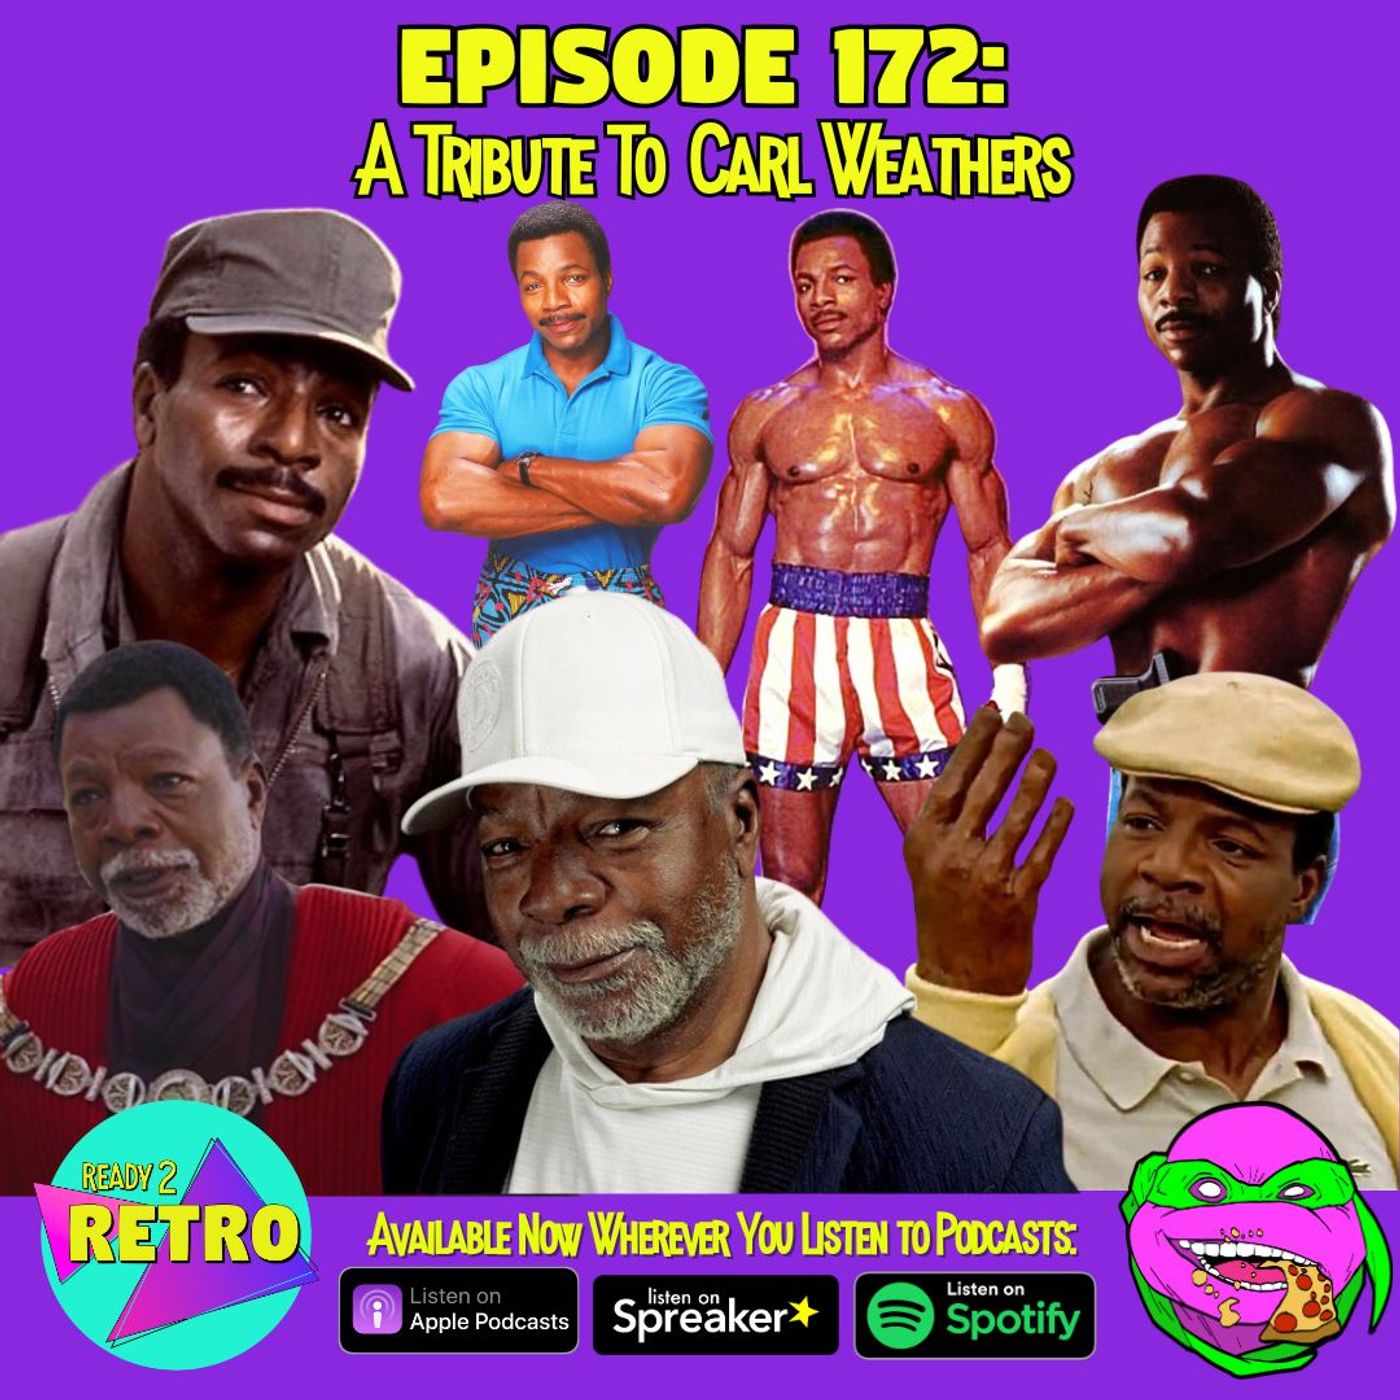 Episode 172: ”A Tribute to Carl Weathers”